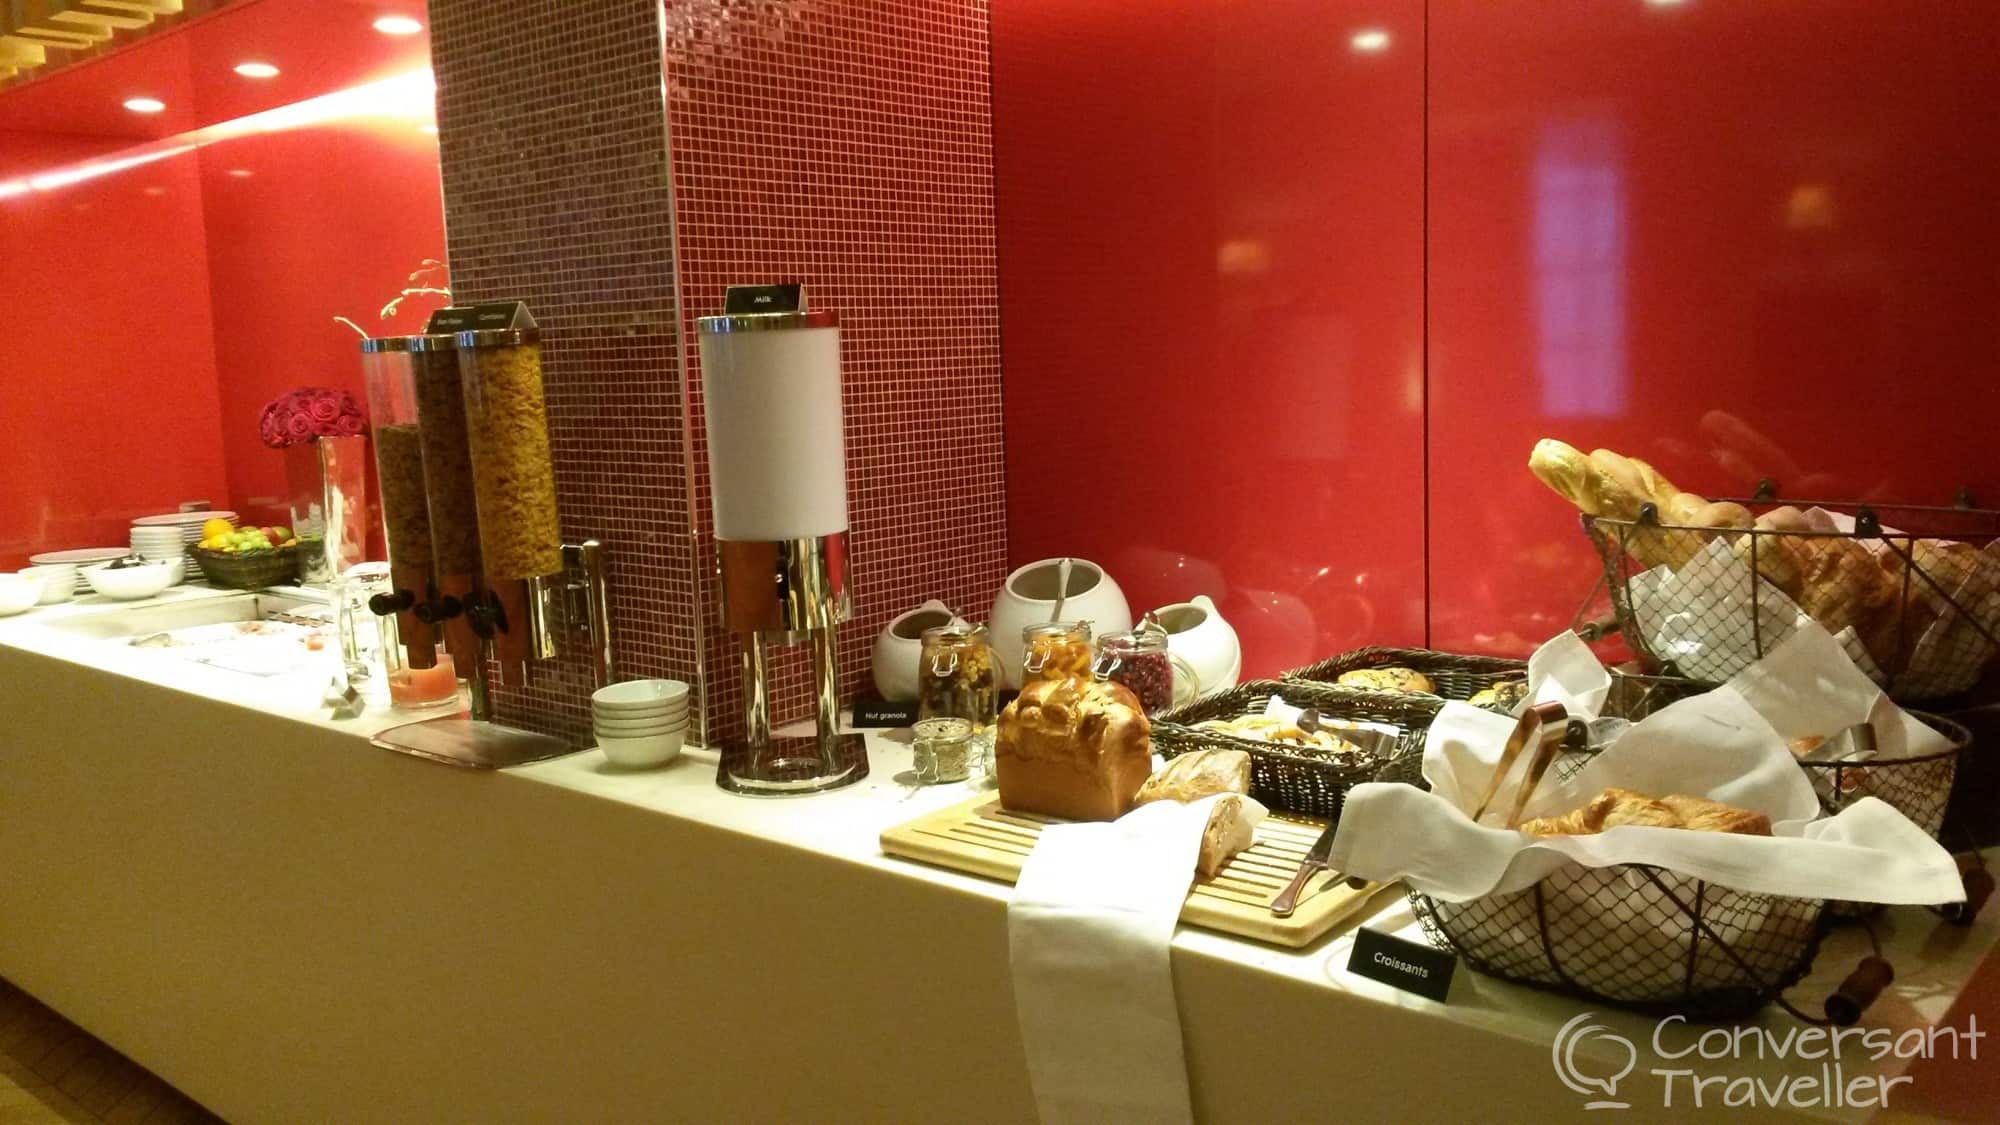 The breakfast spread at the Apex Temple Court Hotel, London